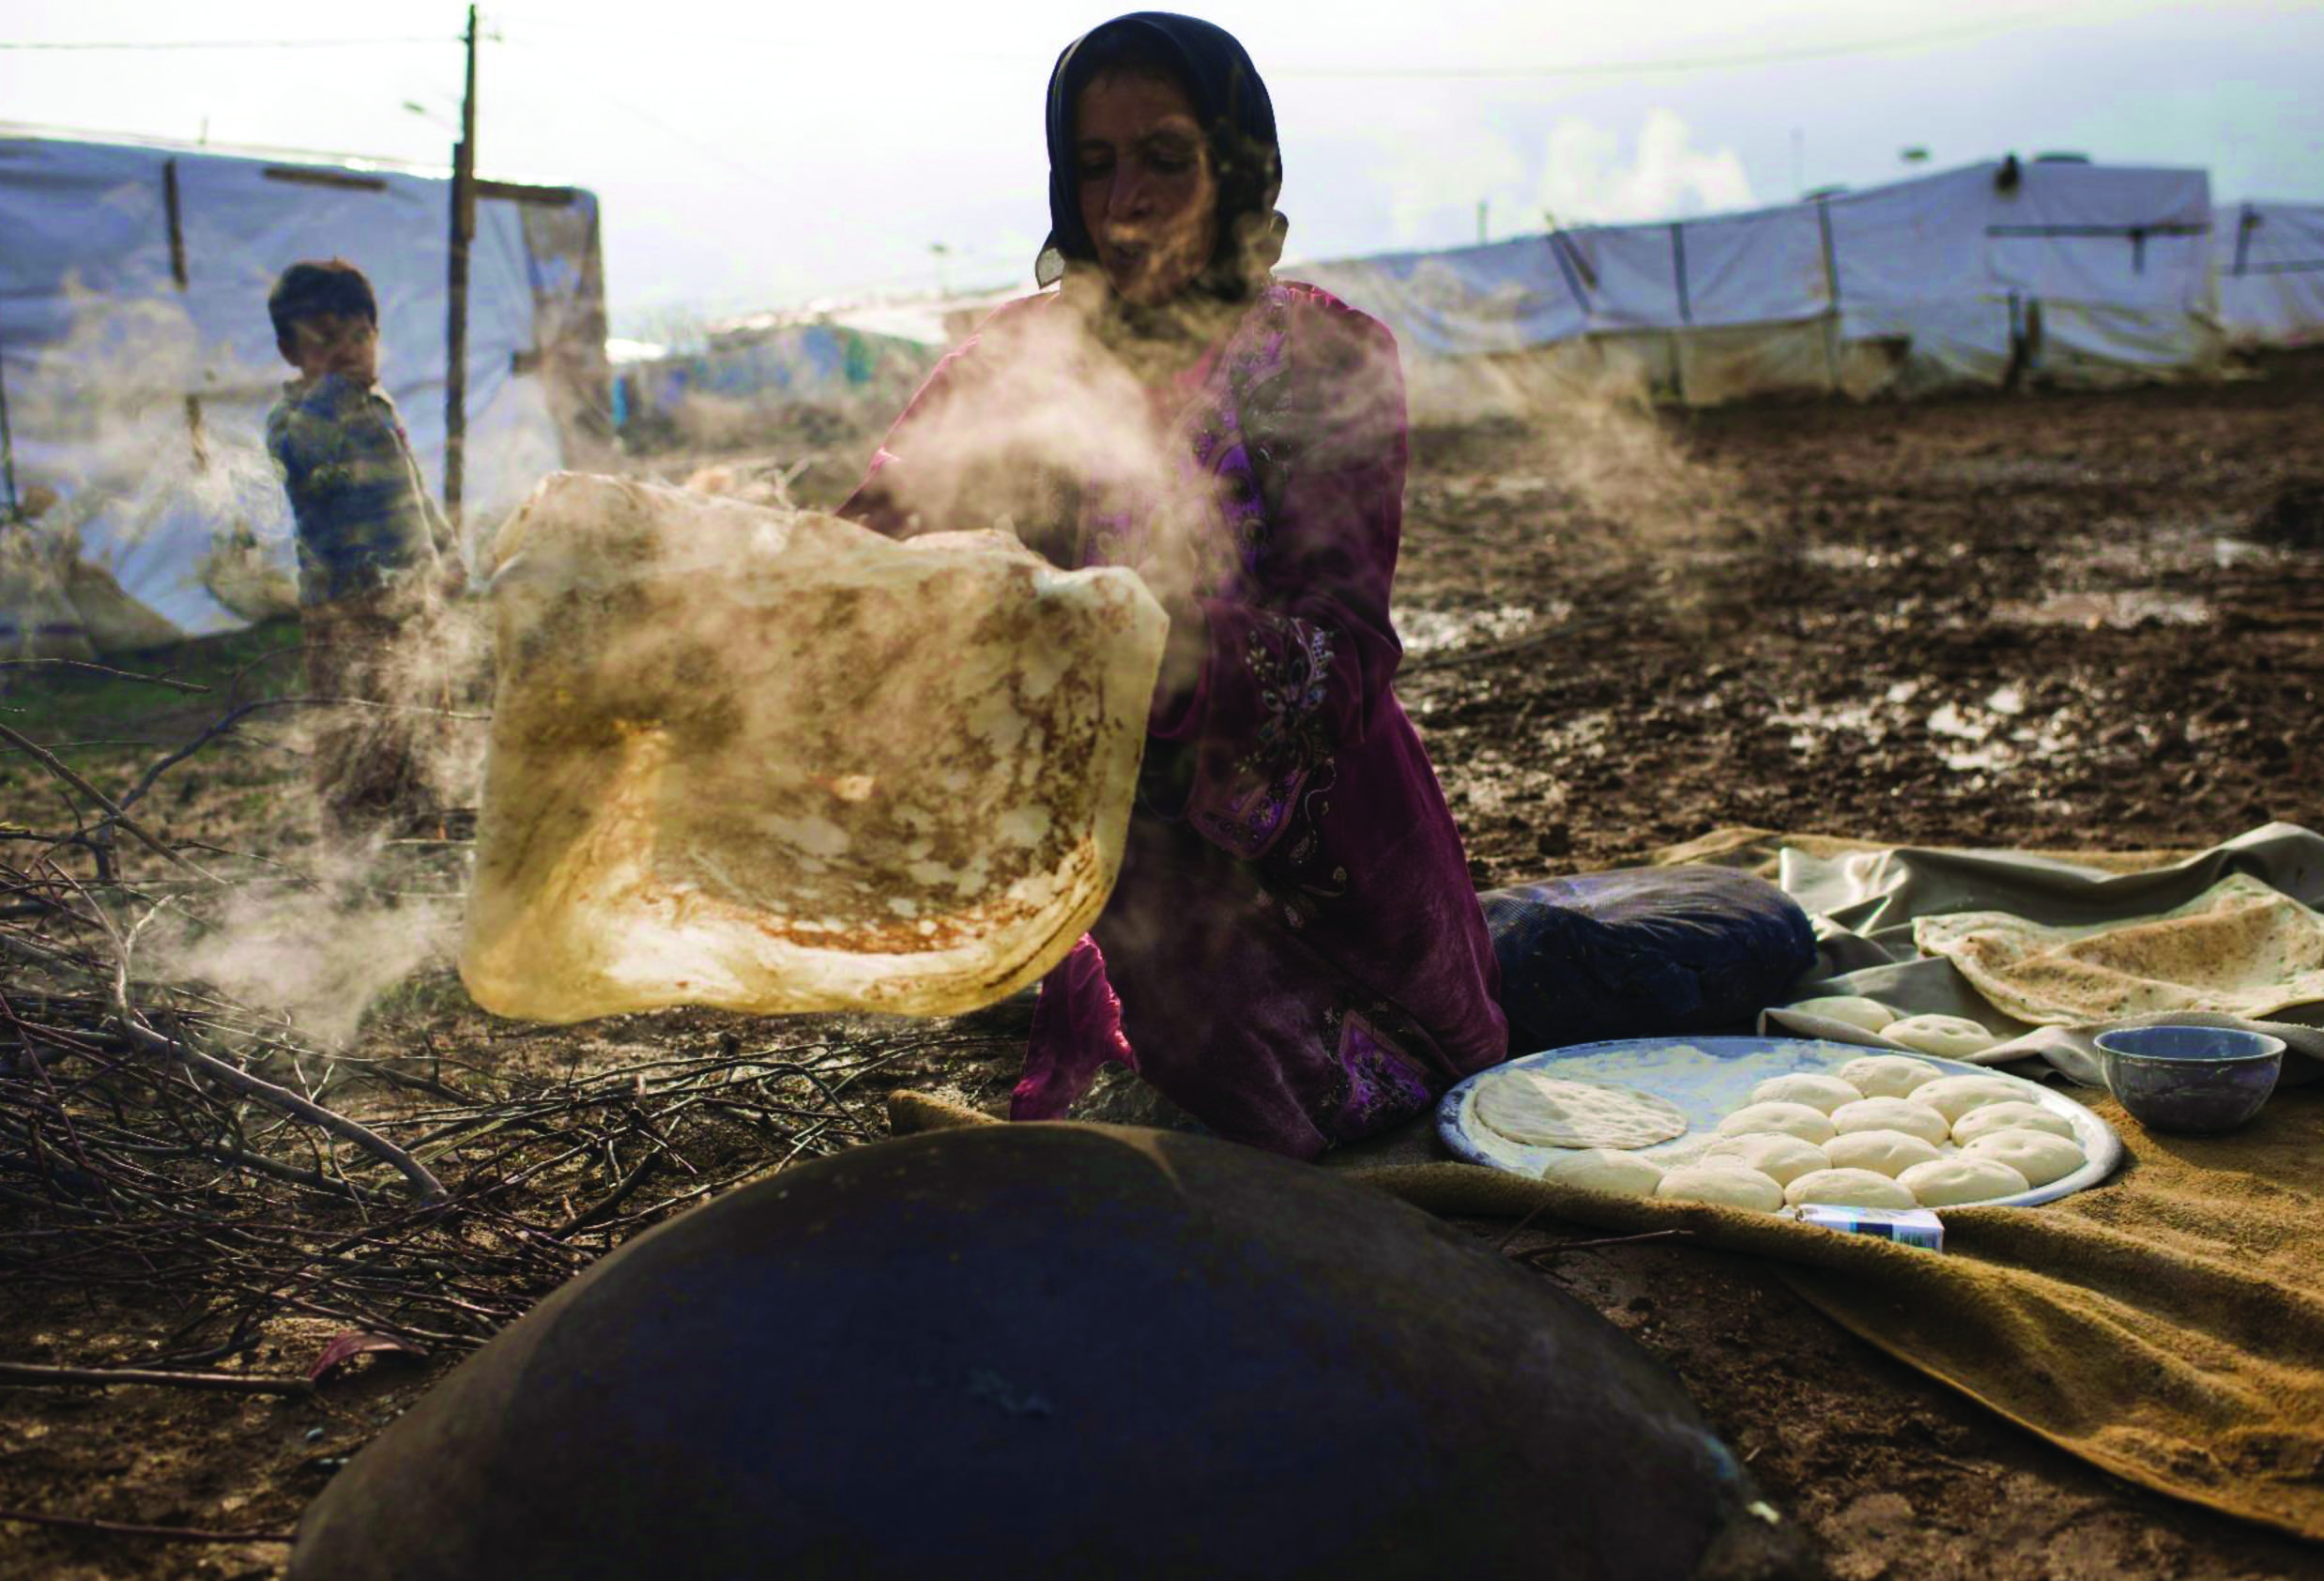 A Syrian mother from Homs, Syria bakes bread outside her shelter in Turbide, Bekaa, Lebanon